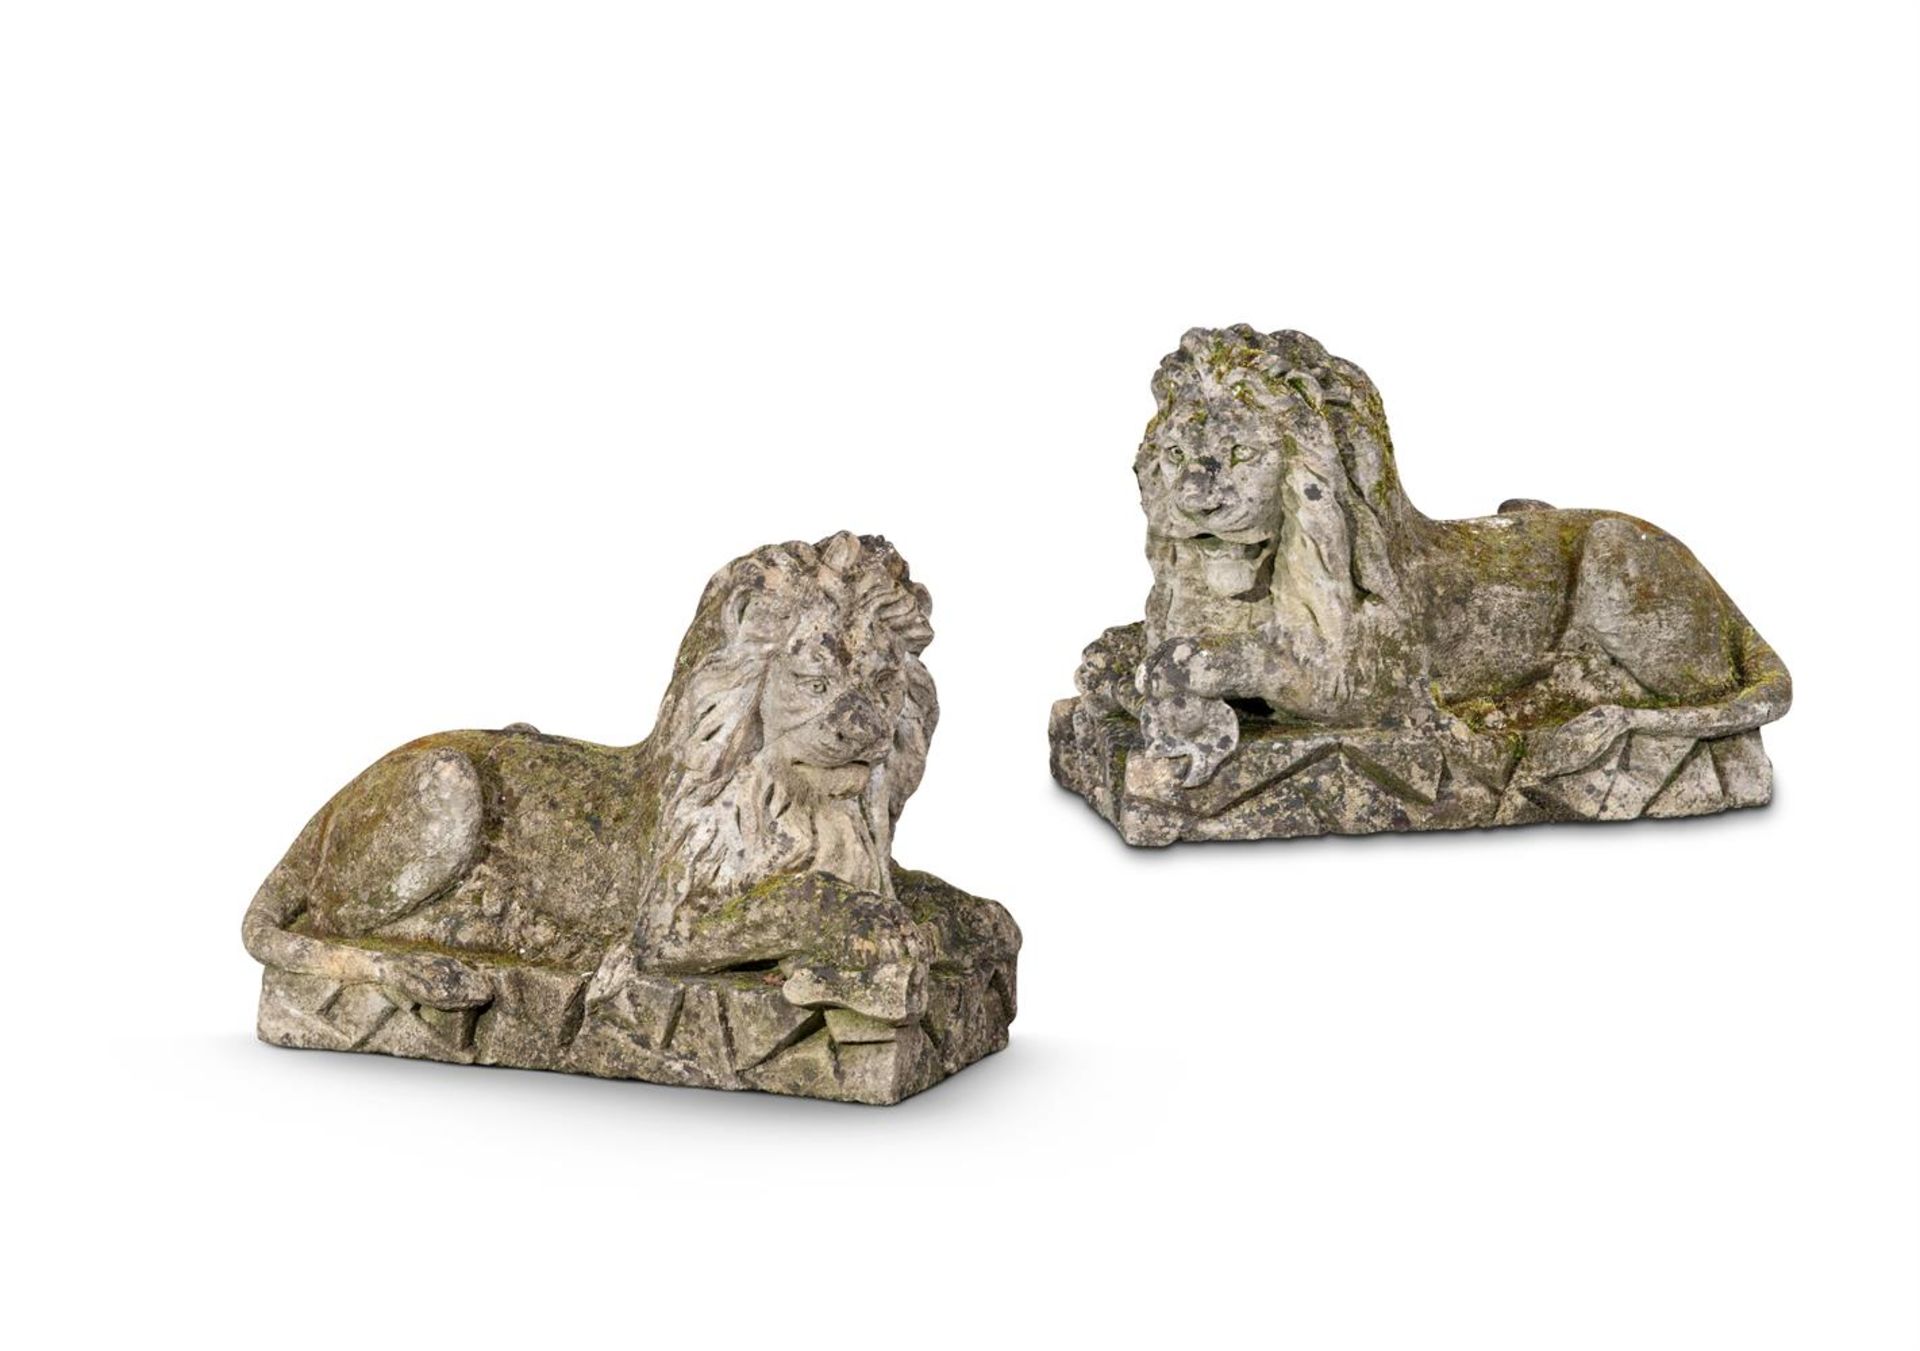 A LARGE AND IMPRESSIVE PAIR OF CARVED BATH STONE RECUMBENT LIONS, EARLY 19TH CENTURY